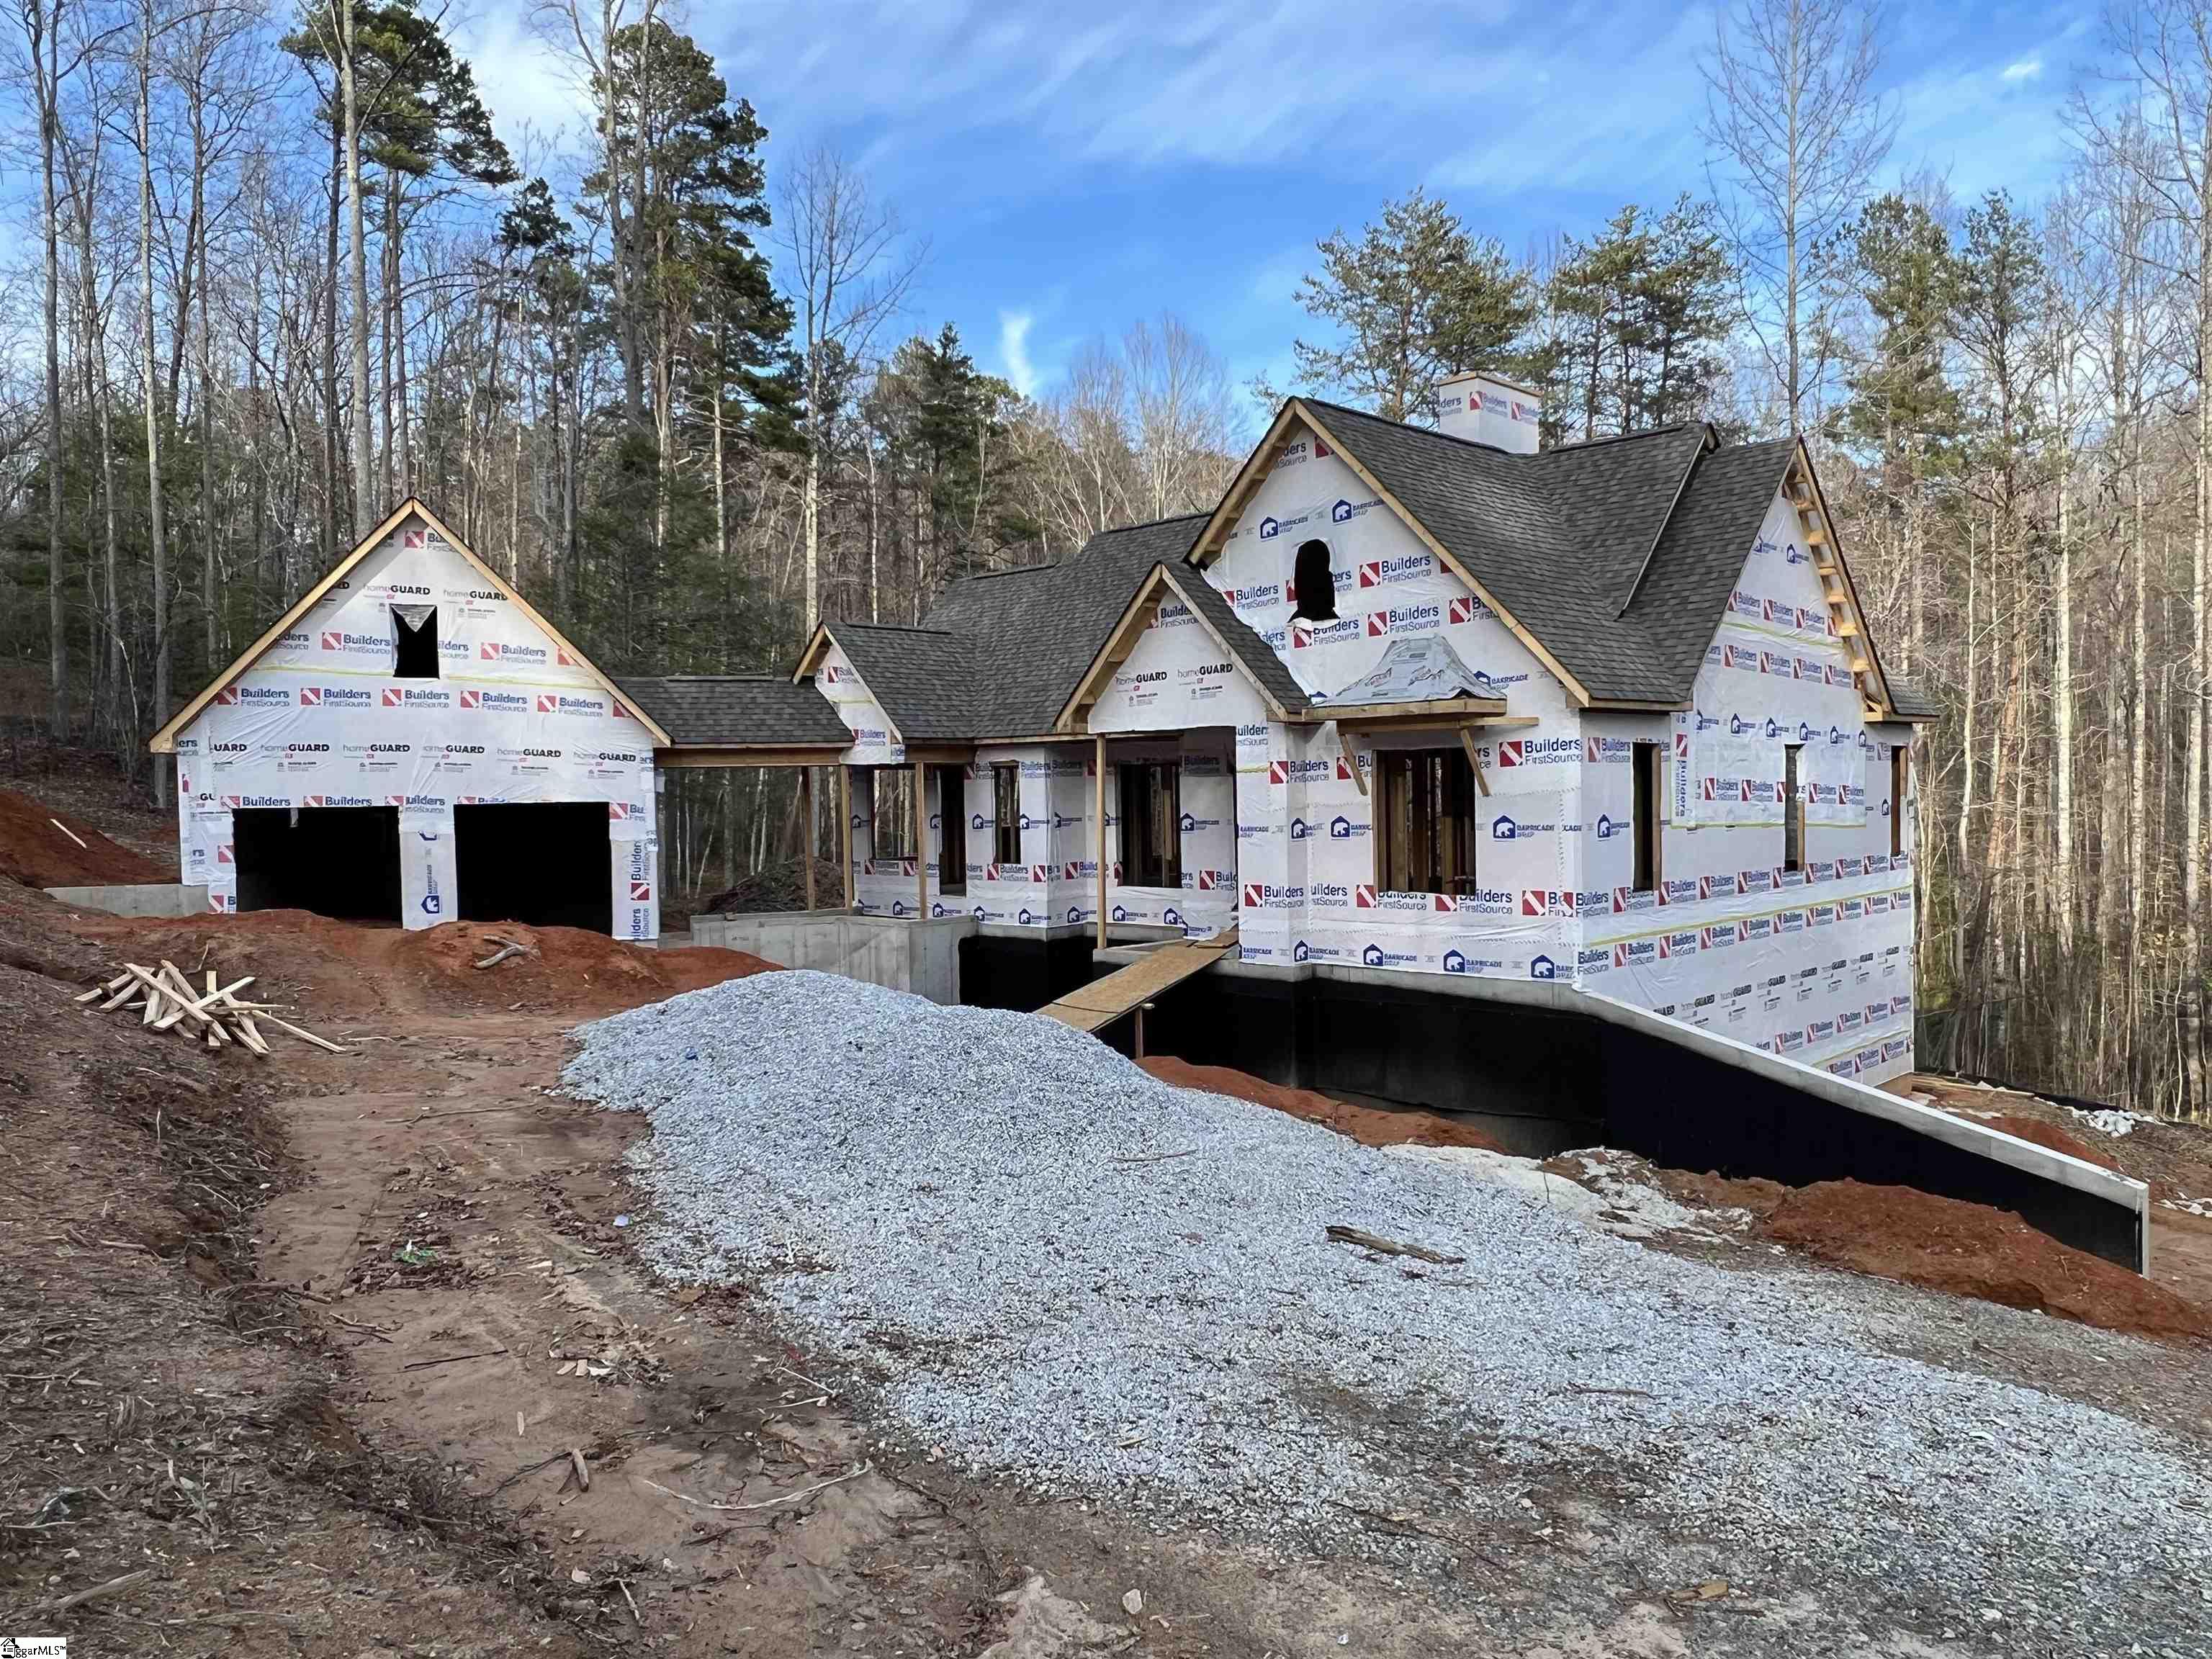 Enjoy true Luxury Living at the Cliffs at Mountain Park in this Beautiful, Brand New Donald Gardner designed home that will be ready for you to move in by the end of June, 2023! Great location only 15 minutes to Travelers Rest, SC & 15 minutes to Hendersonville, NC. Property is located just off the main road on a nice private cul-de-sac only minutes from the Clubhouse. There is a creek at the back of the property and on the other side of the creek is one of the many walking trails throughout Mountain Park. This is a custom home being built by Bartron Builders. House plans are in documents. Home will feature an LG Appliance package with a Gas top Stove with Double Ovens. Home will also feature a back up Generator for convenience. A Cliffs Membership is available for Purchase. Don't miss out on this wonderful opportunity to get a brand new home!